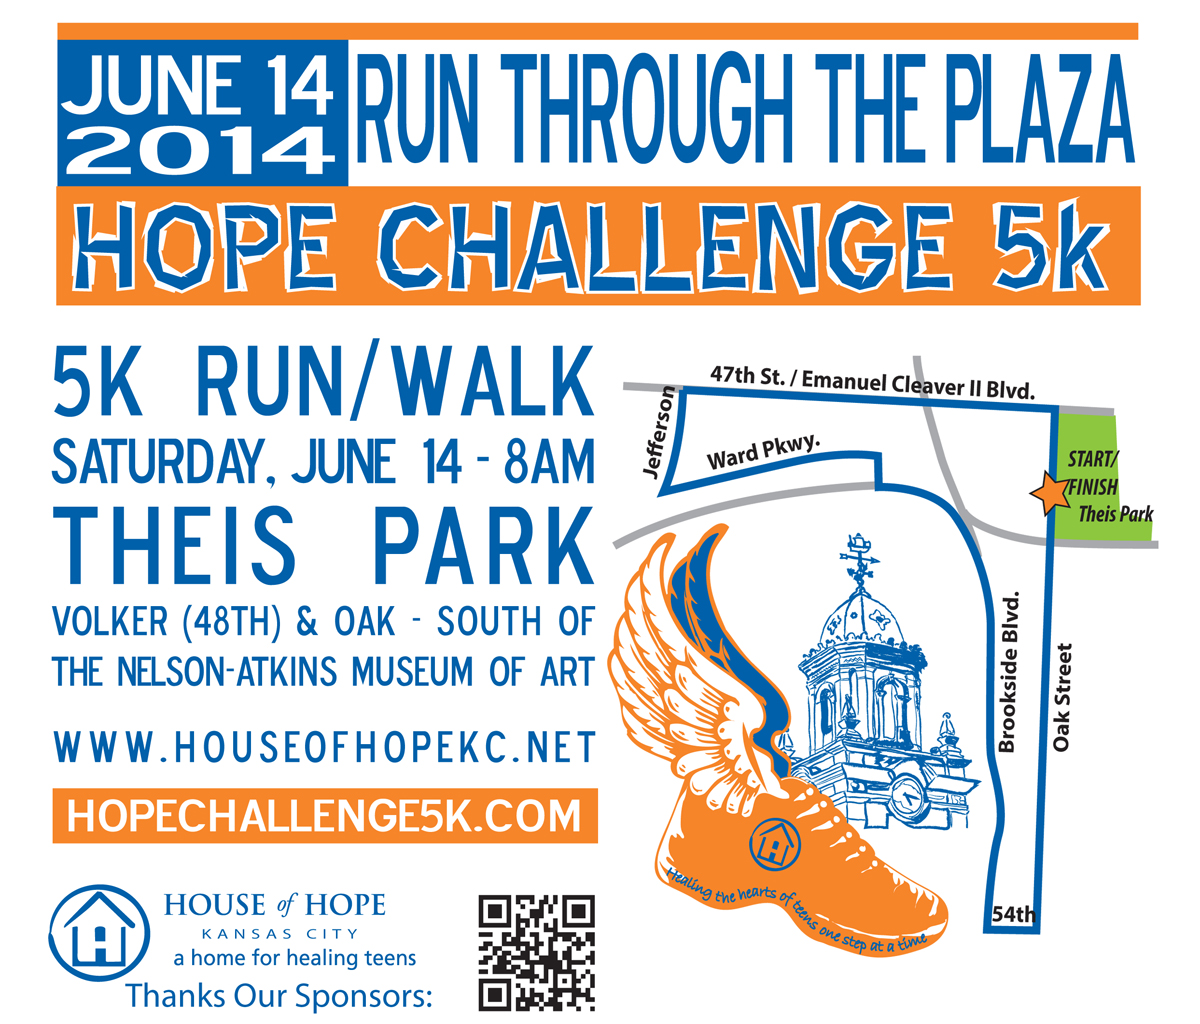 Kansas City's The Hope Challenge 5K Coupon Code Race for 20.00